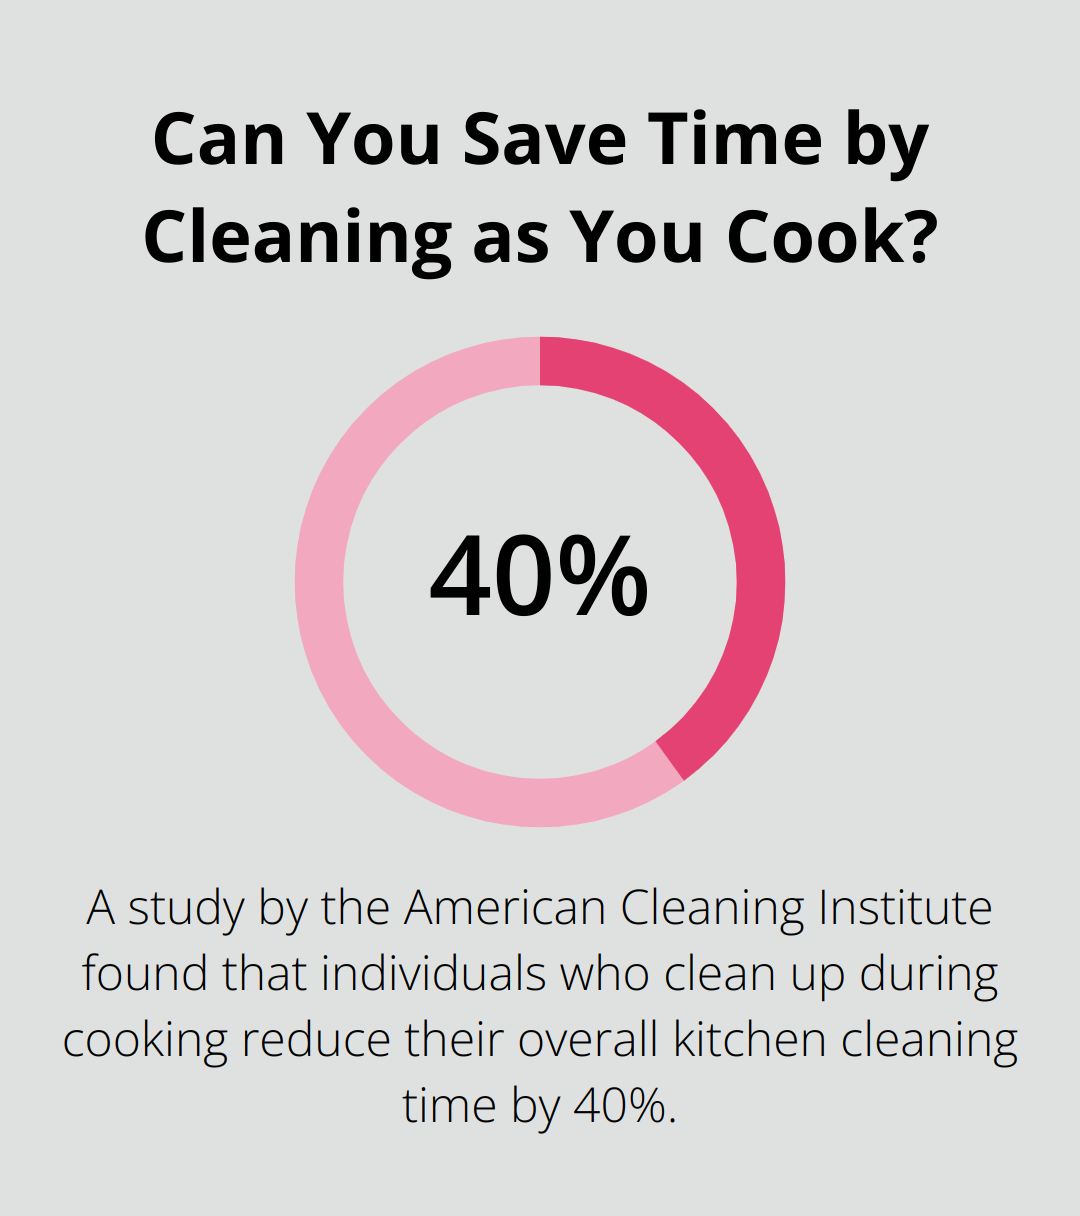 Can You Save Time by Cleaning as You Cook?